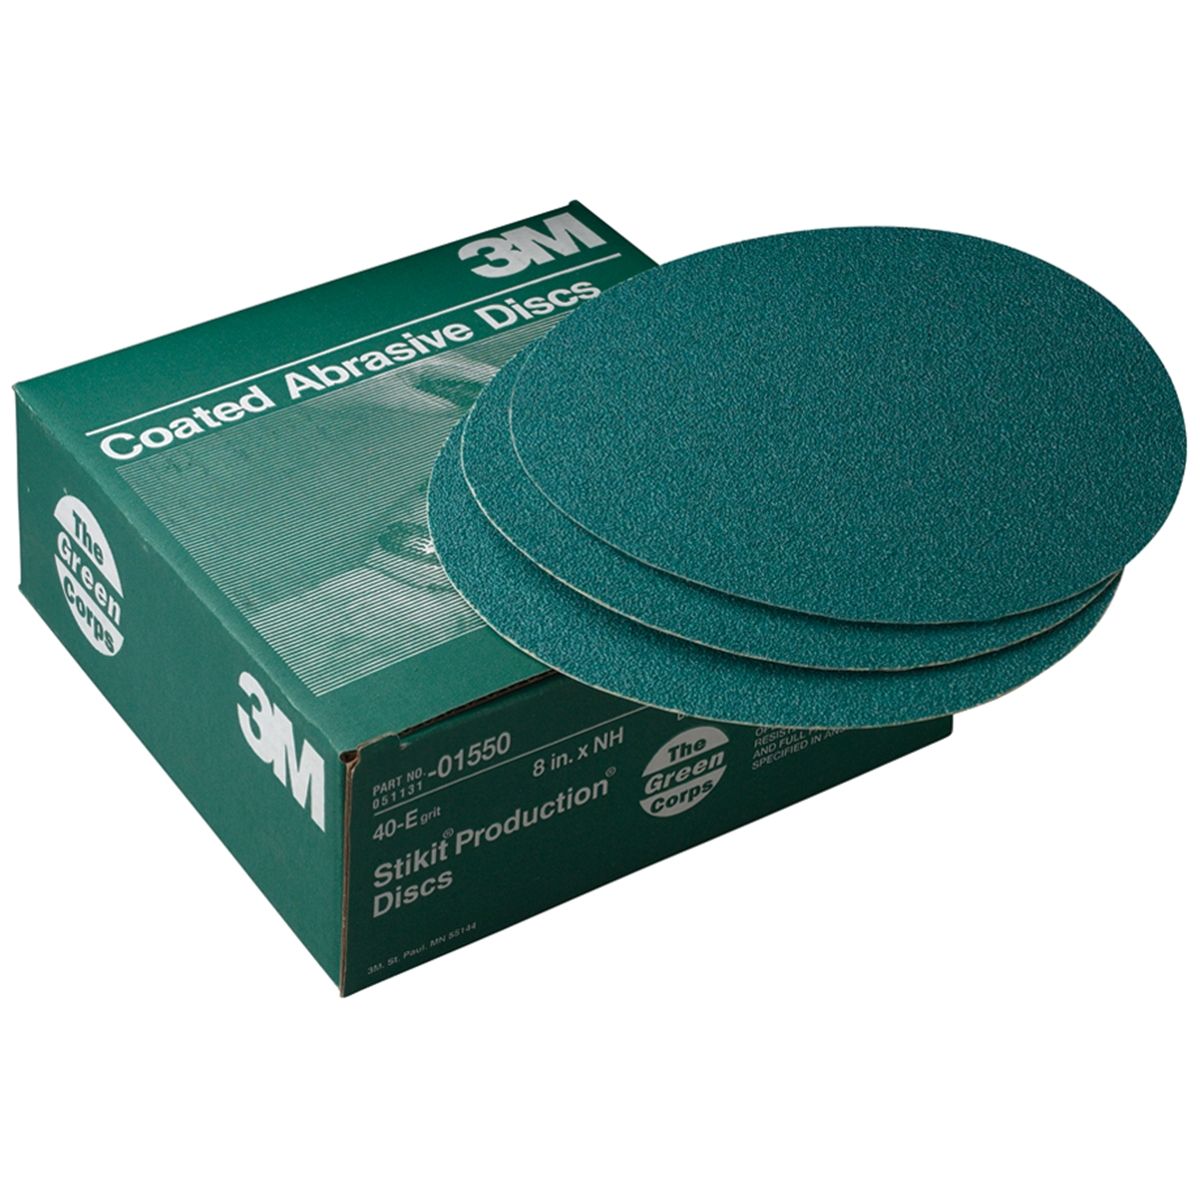 Green Corps Stikit Production Disc 8 Inch 40 Grade